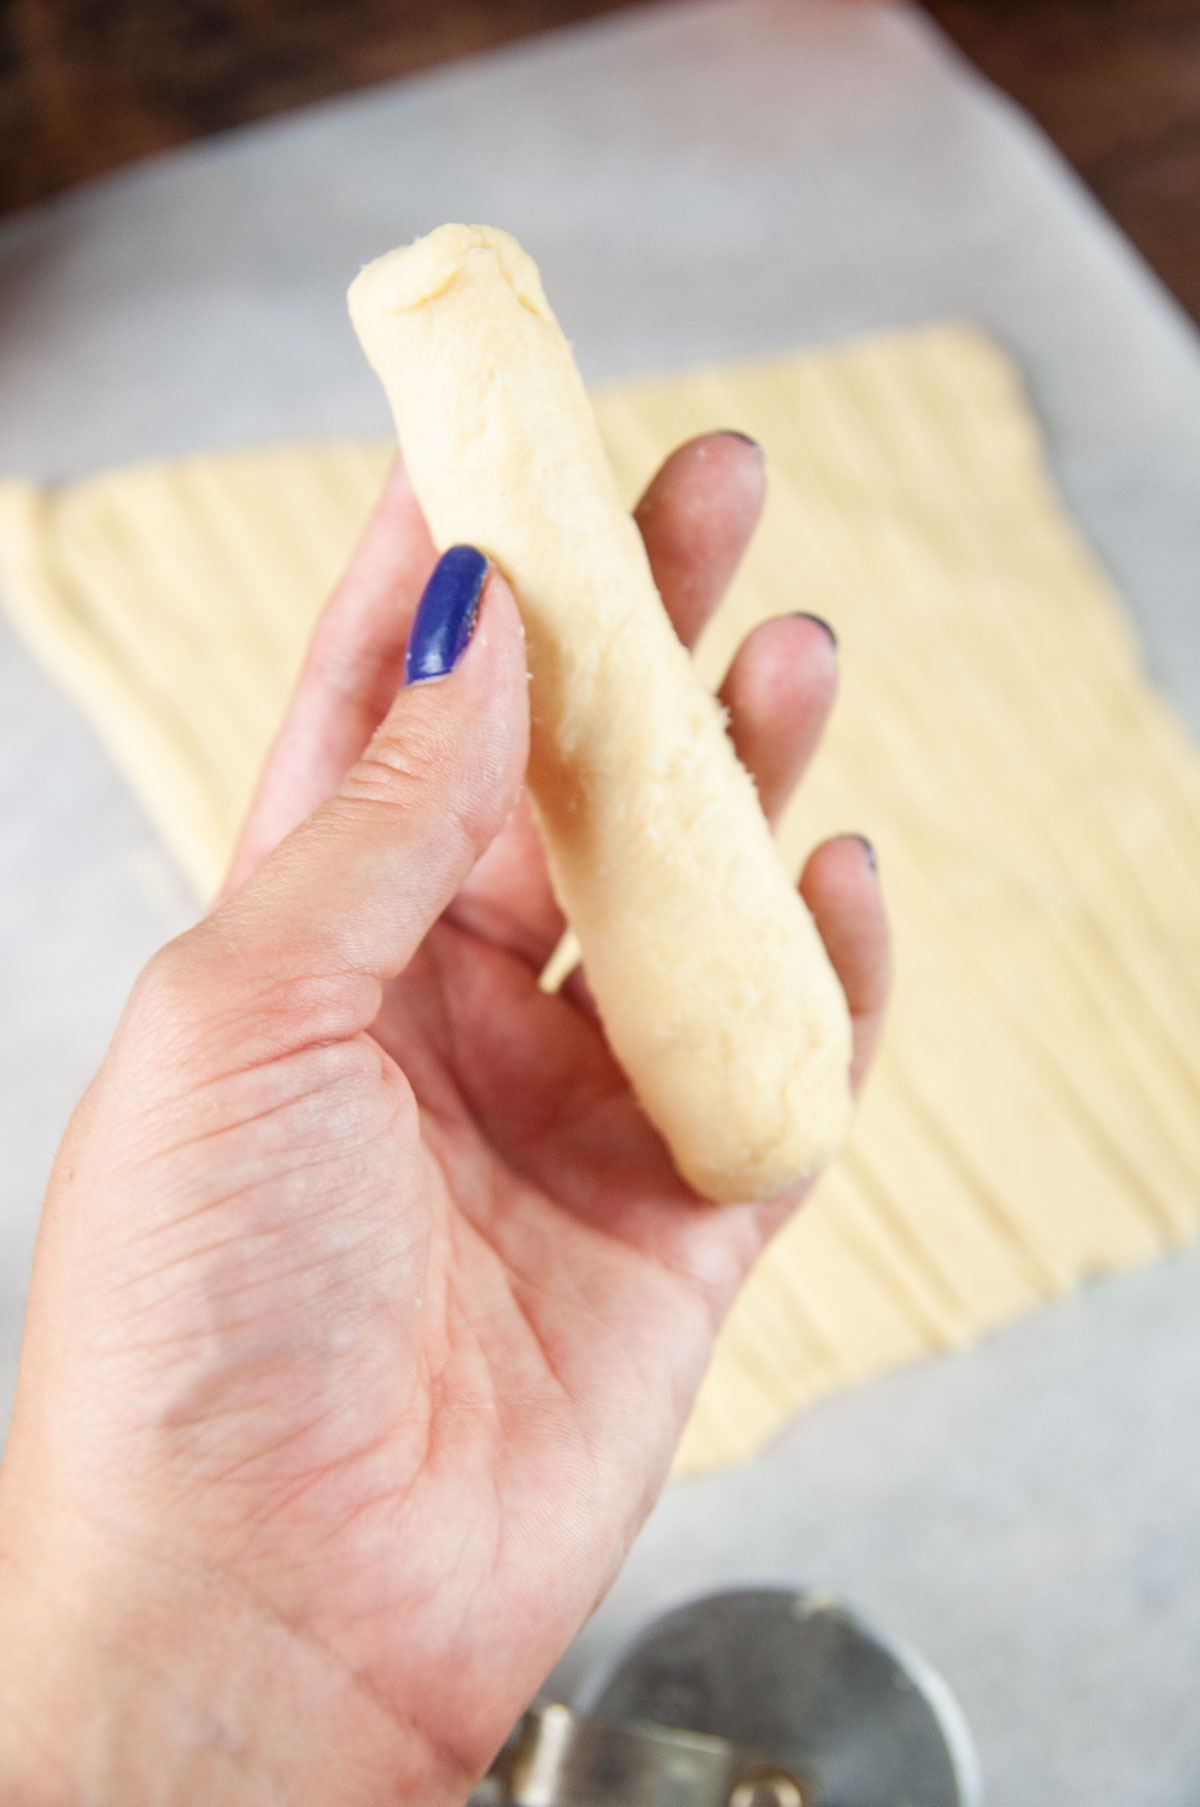 Wrap the frozen string cheese entirely in a thin layer of crescent dough